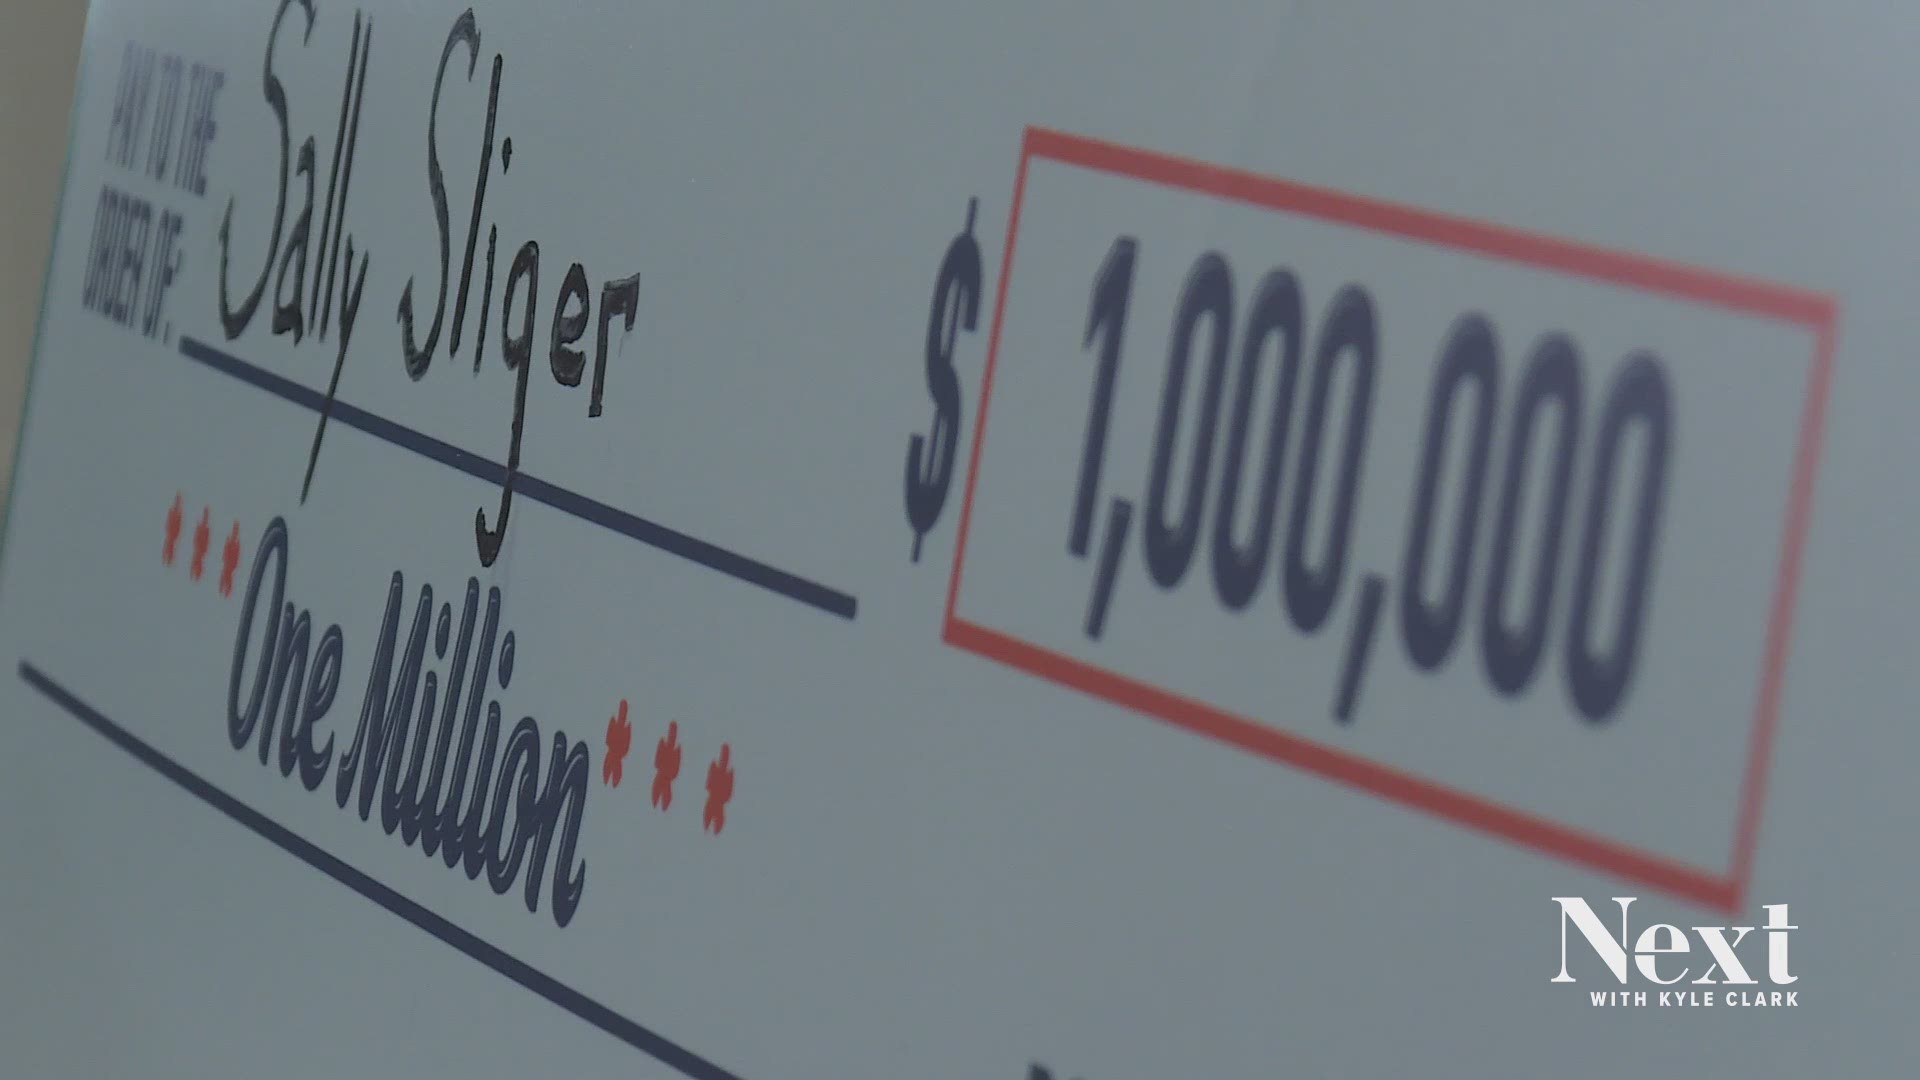 Gov. Jared Polis on Friday announced that Sally Sliger of Mead was the first $1 million winner of the Colorado Comeback Cash COVID-19 vaccine drawing.